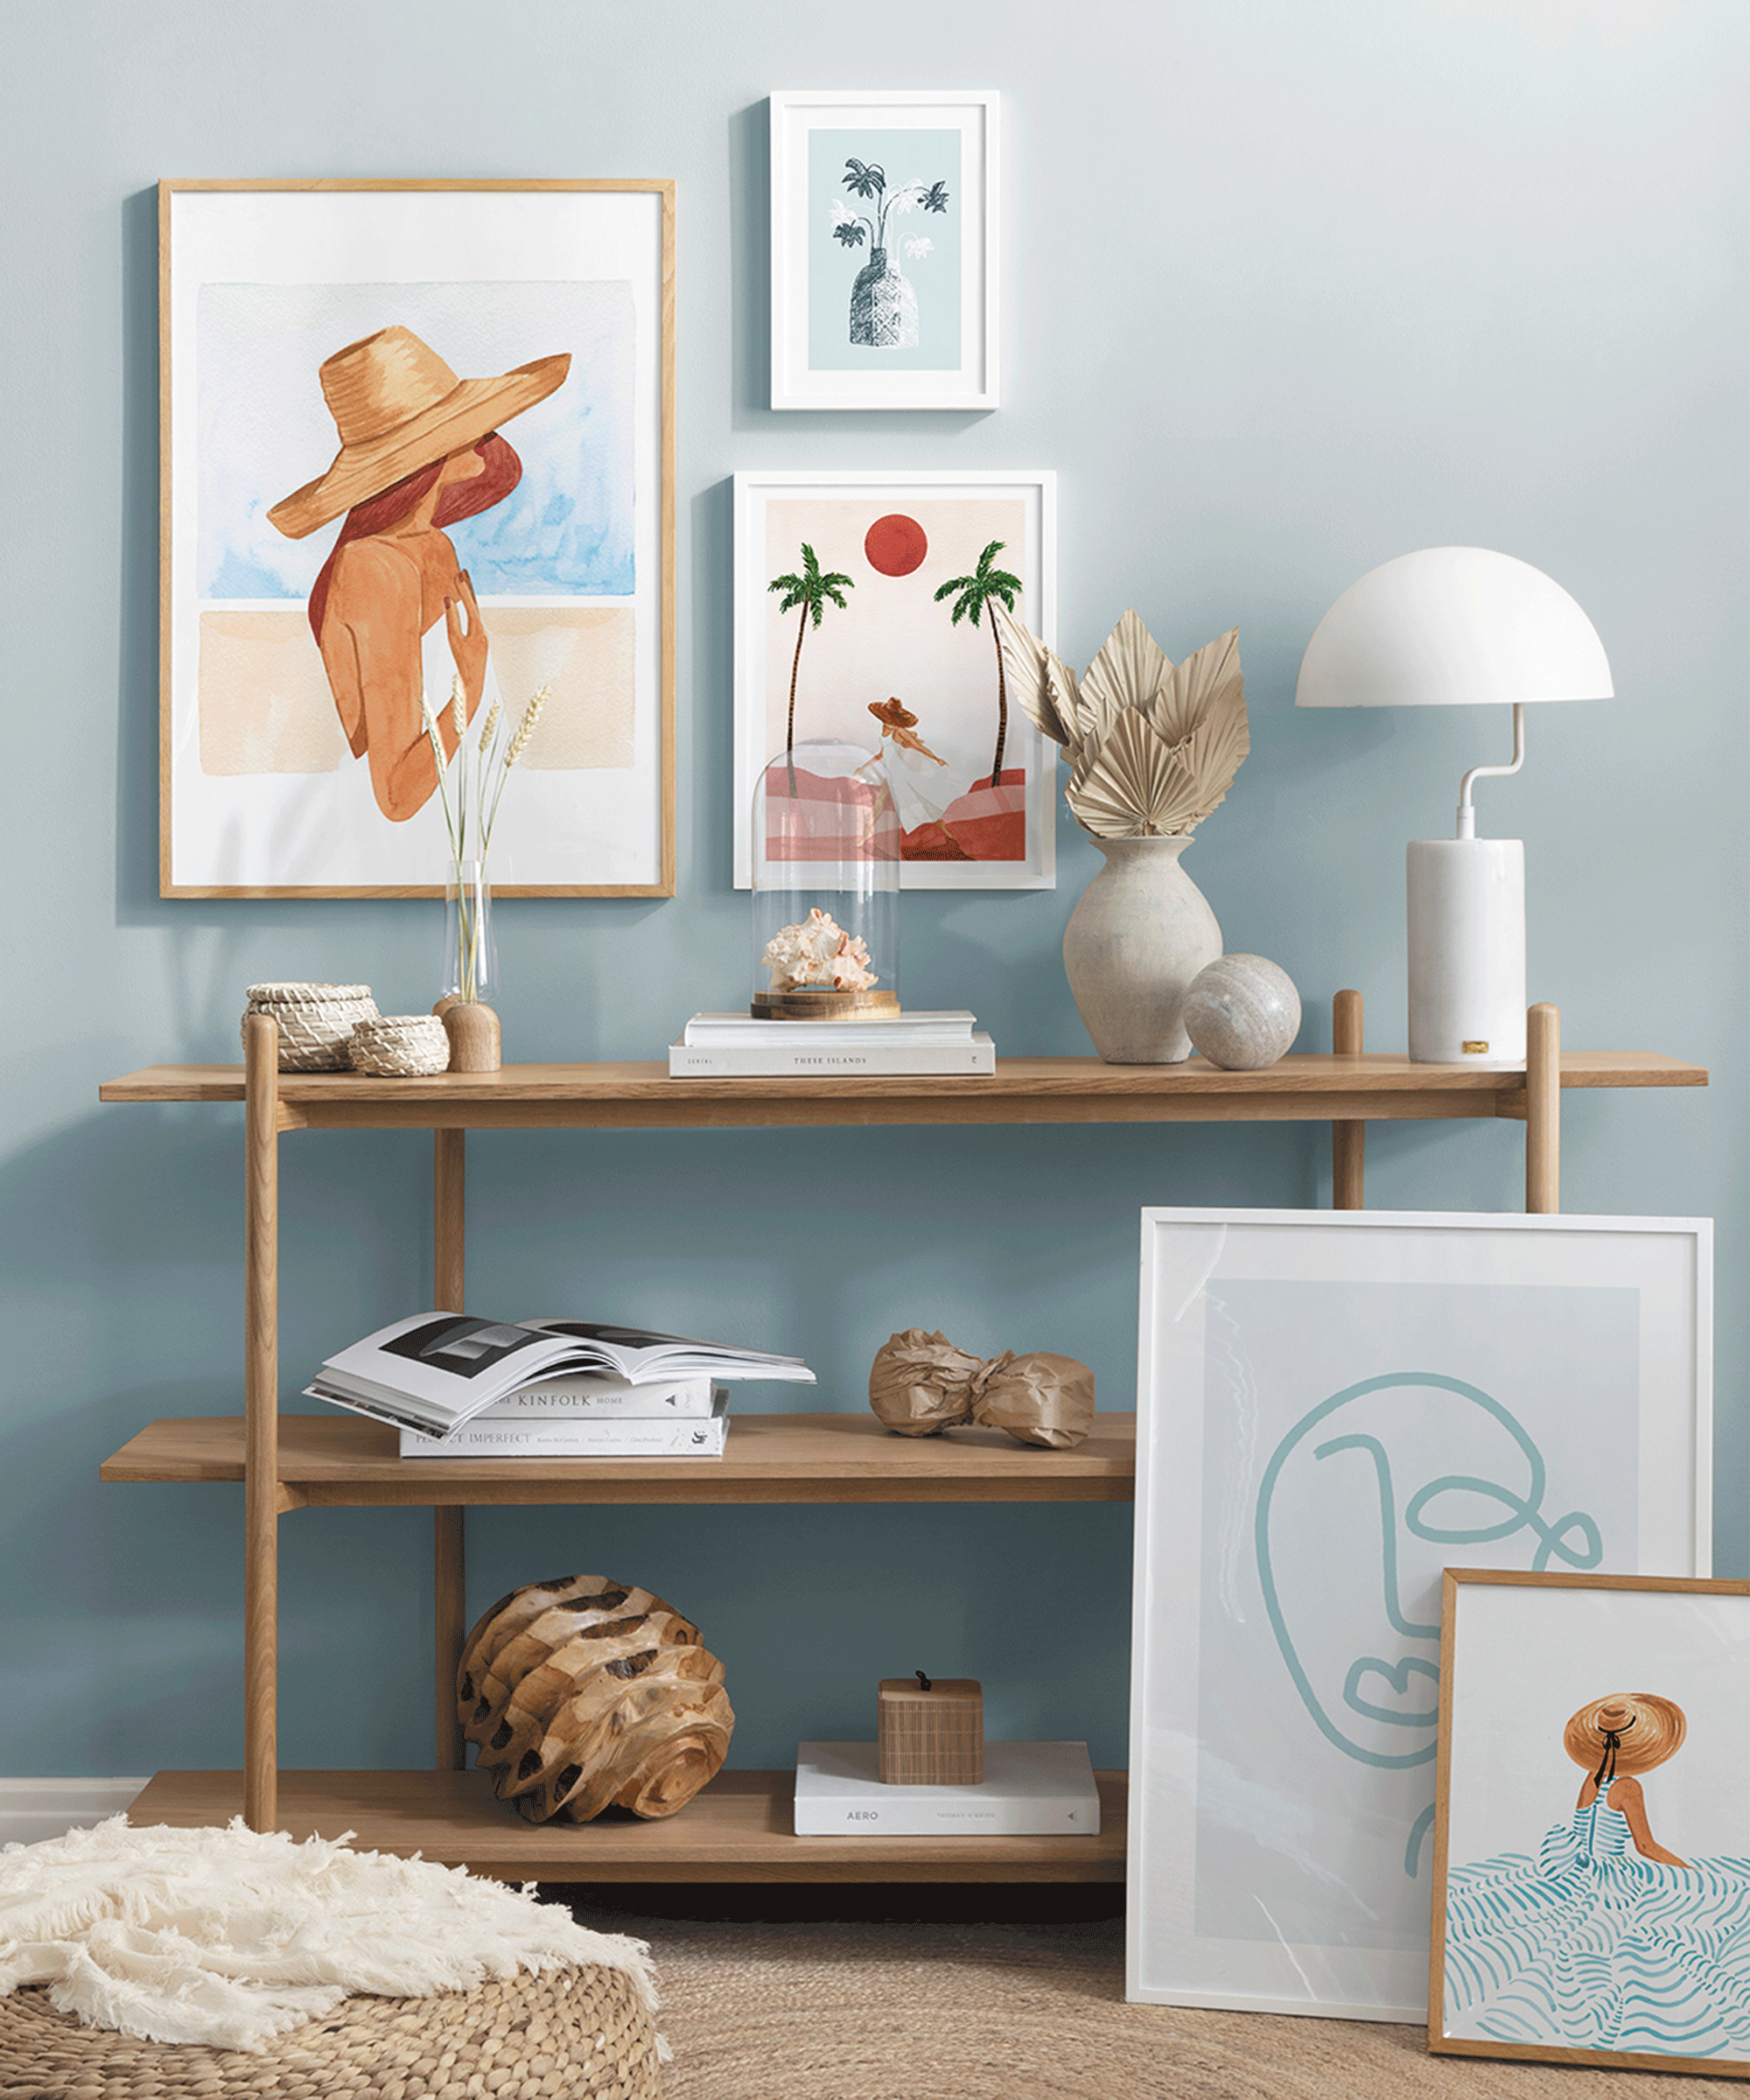 Beach inspired framed poster printed wall art with wooden shelving, white vase and hardback books